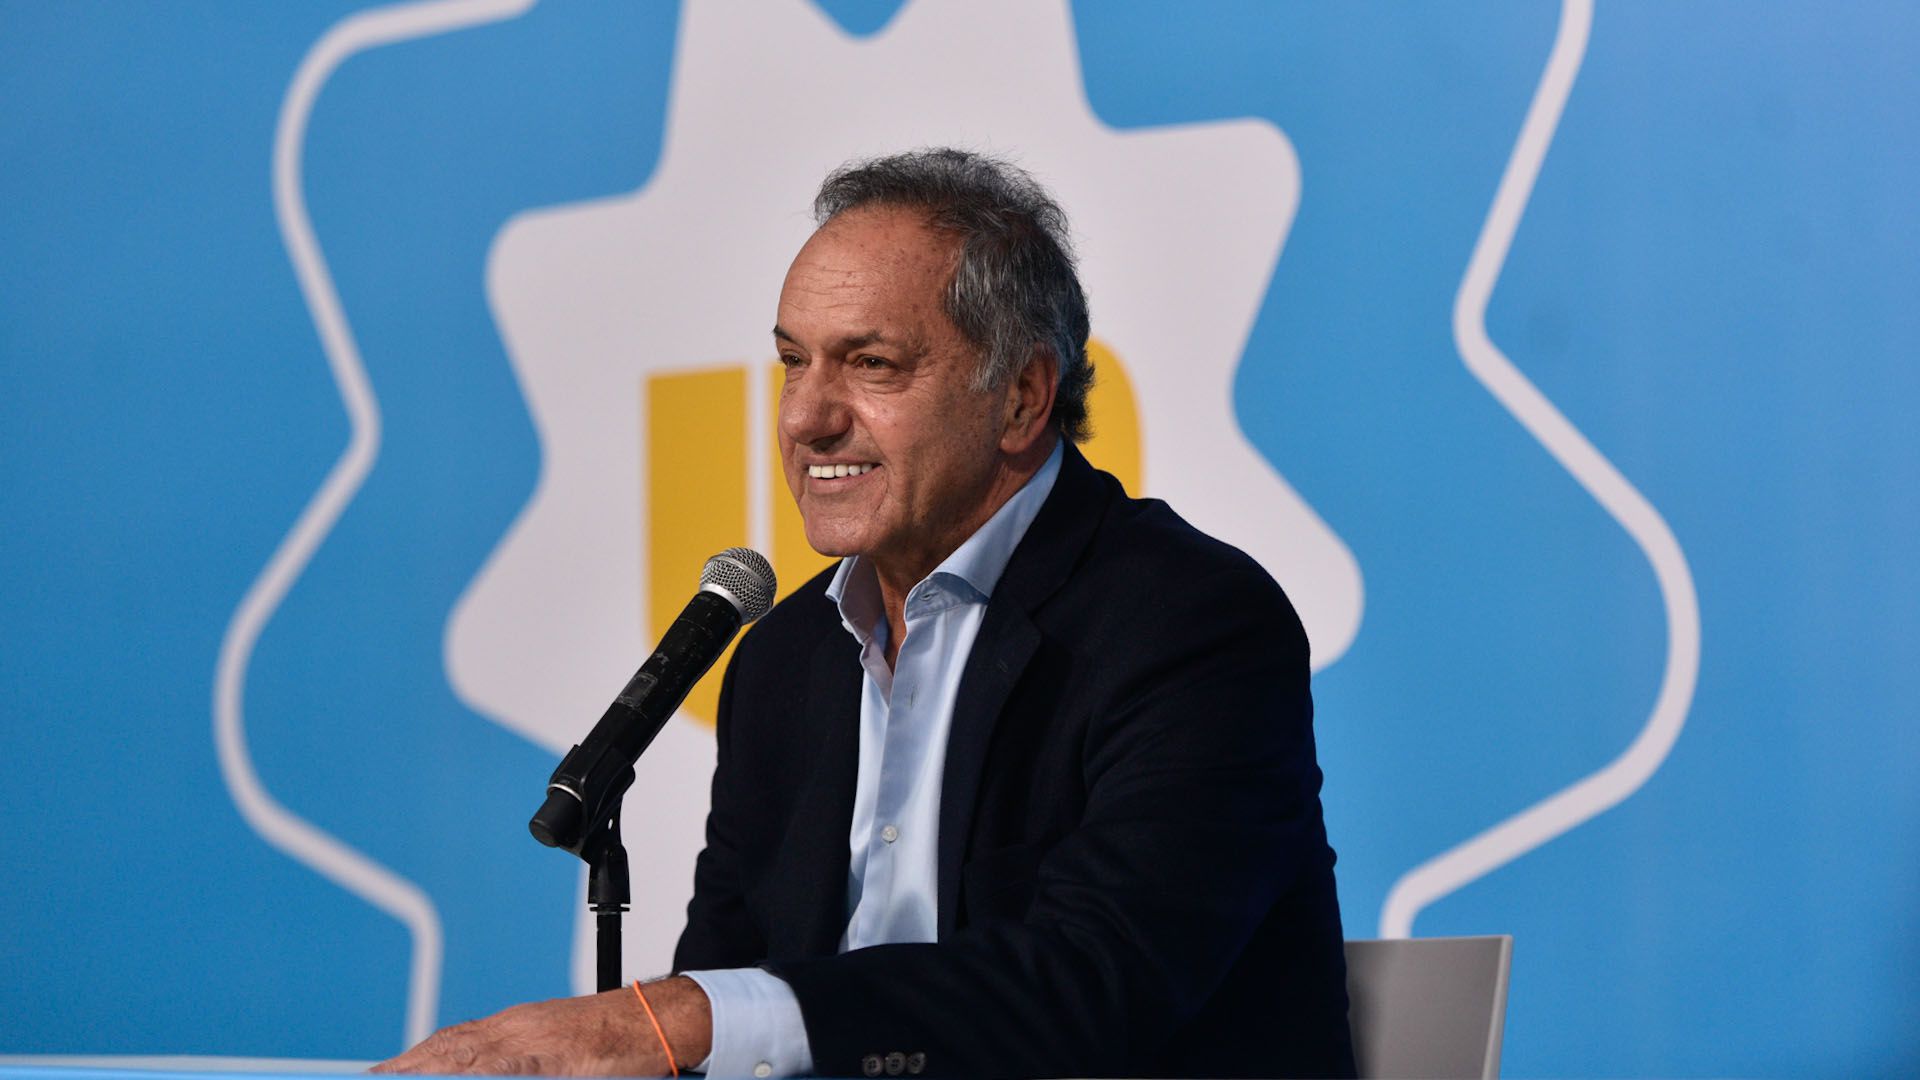 Daniel Scioli was one of the first speakers in the bunker of the ruling party (Adrián)